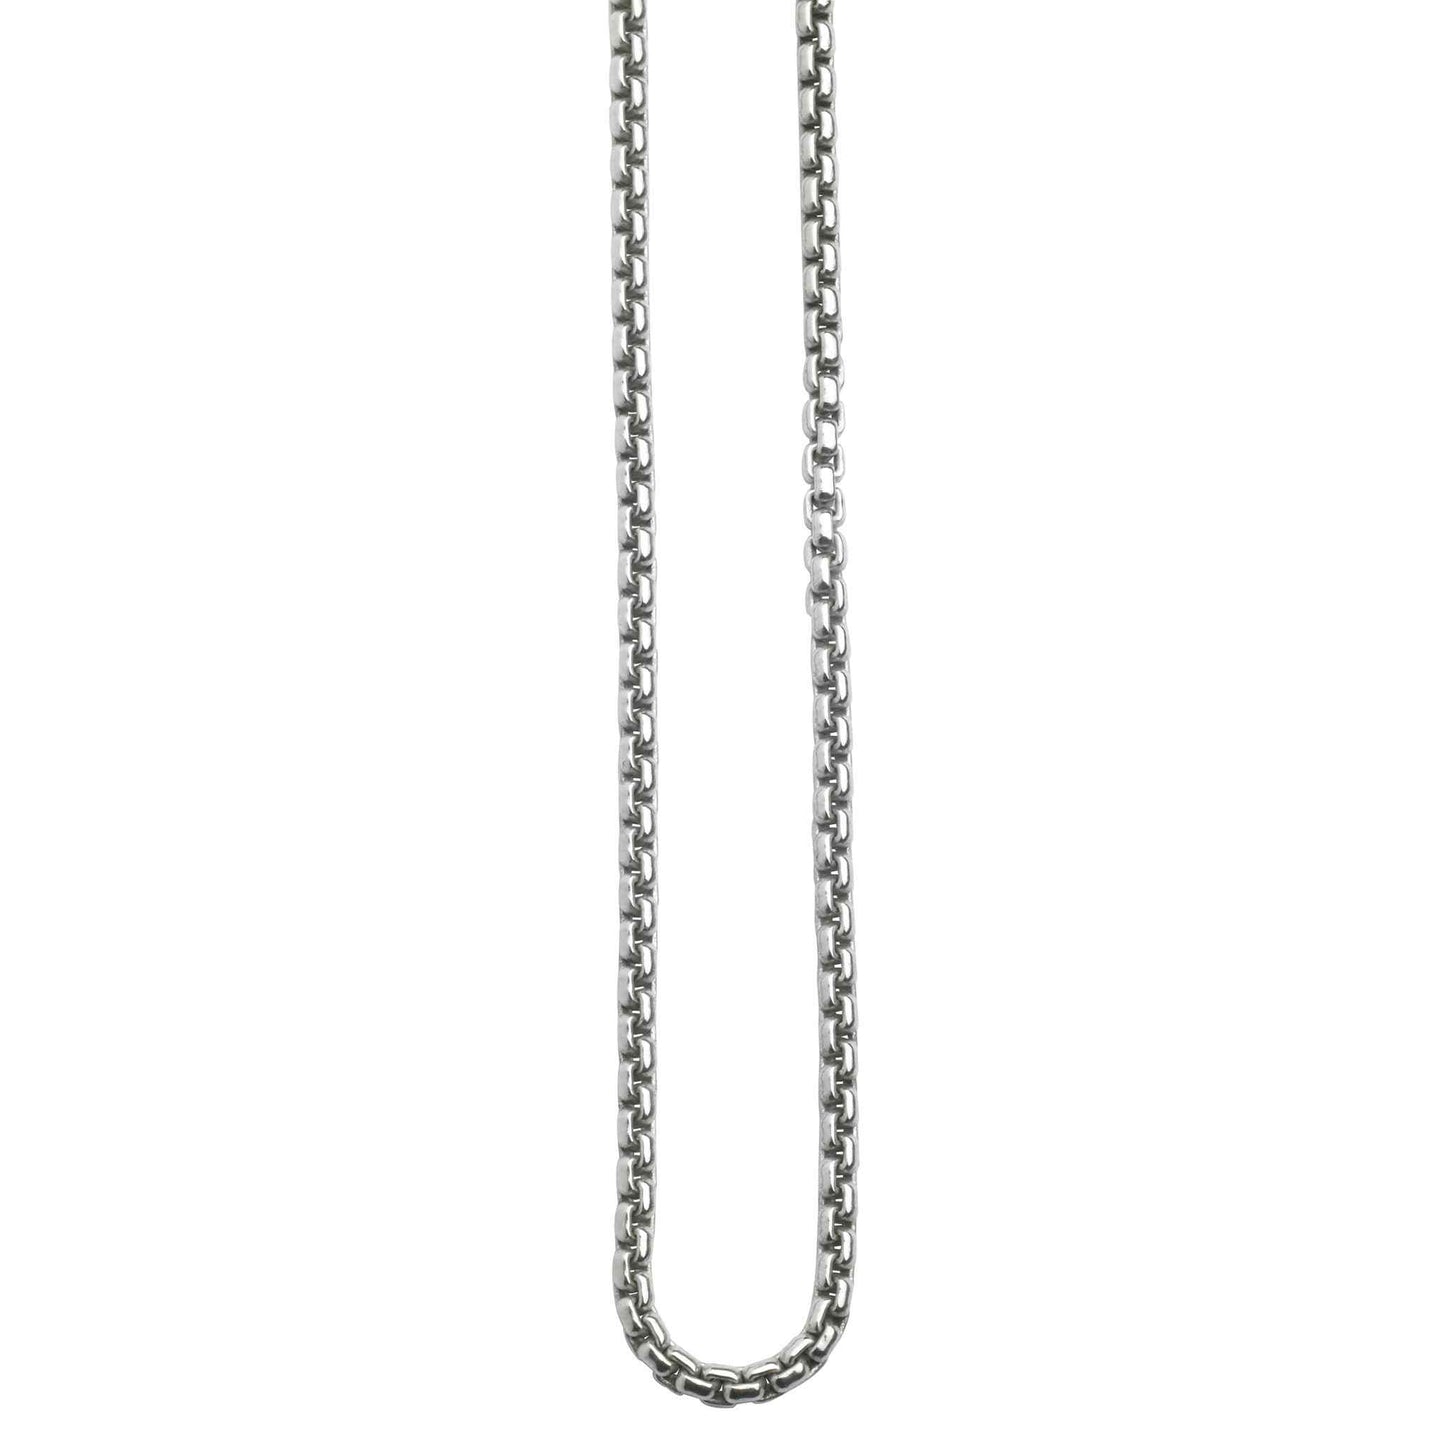 A 1.8 mm sterling silver 16" rounded box chain displayed on a neutral white background.